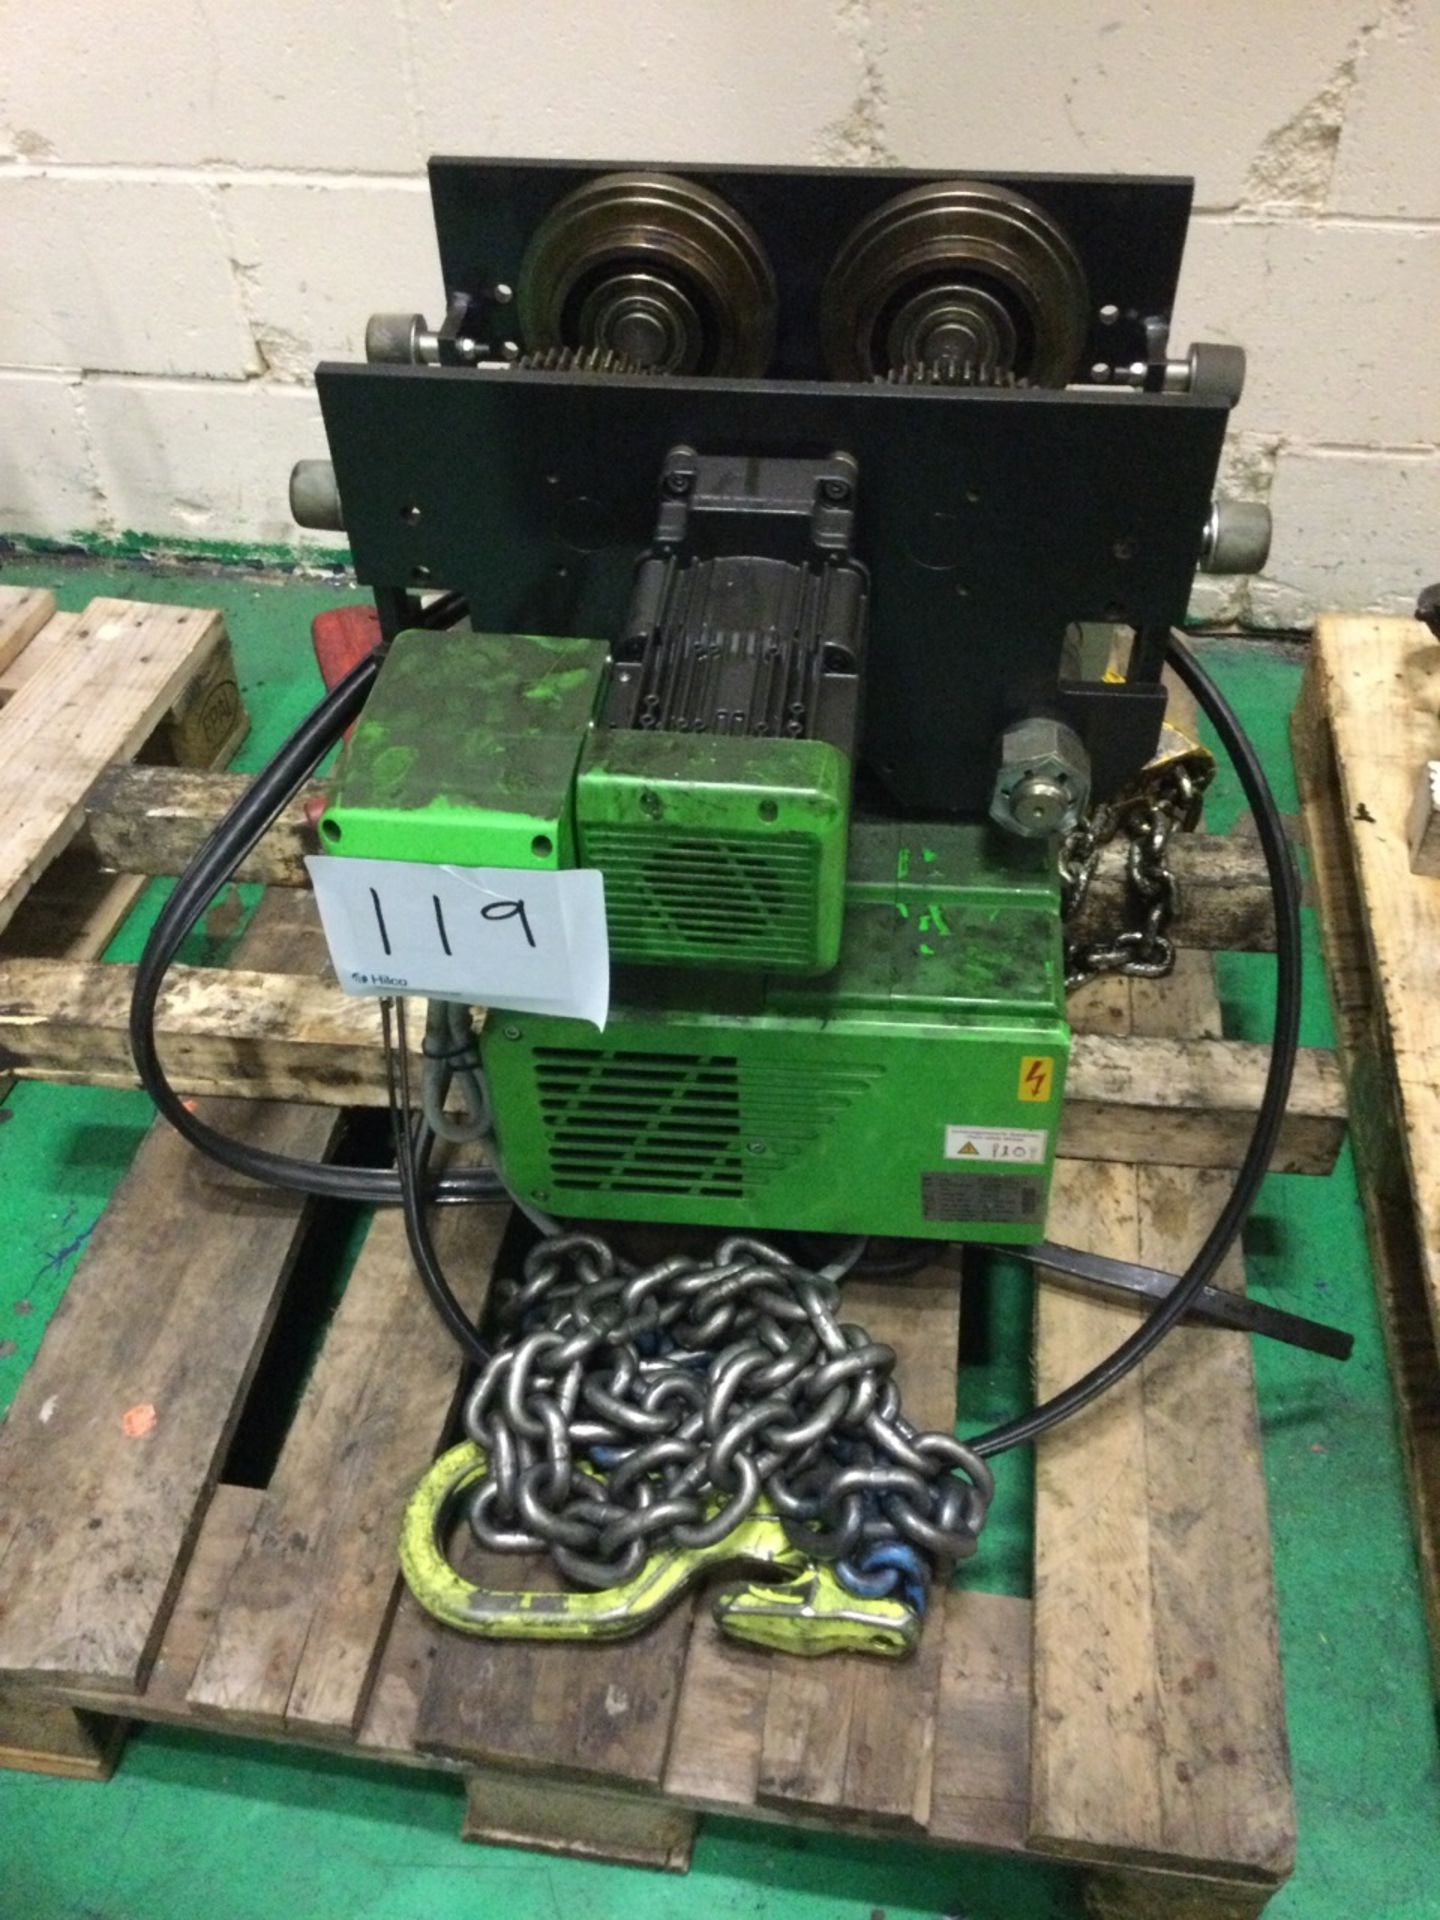 1 Stahl, ST50, Electric Chain Hoist With Pendant Control, 5 Tonne Rated Capacity(Removed From Overh - Image 2 of 2